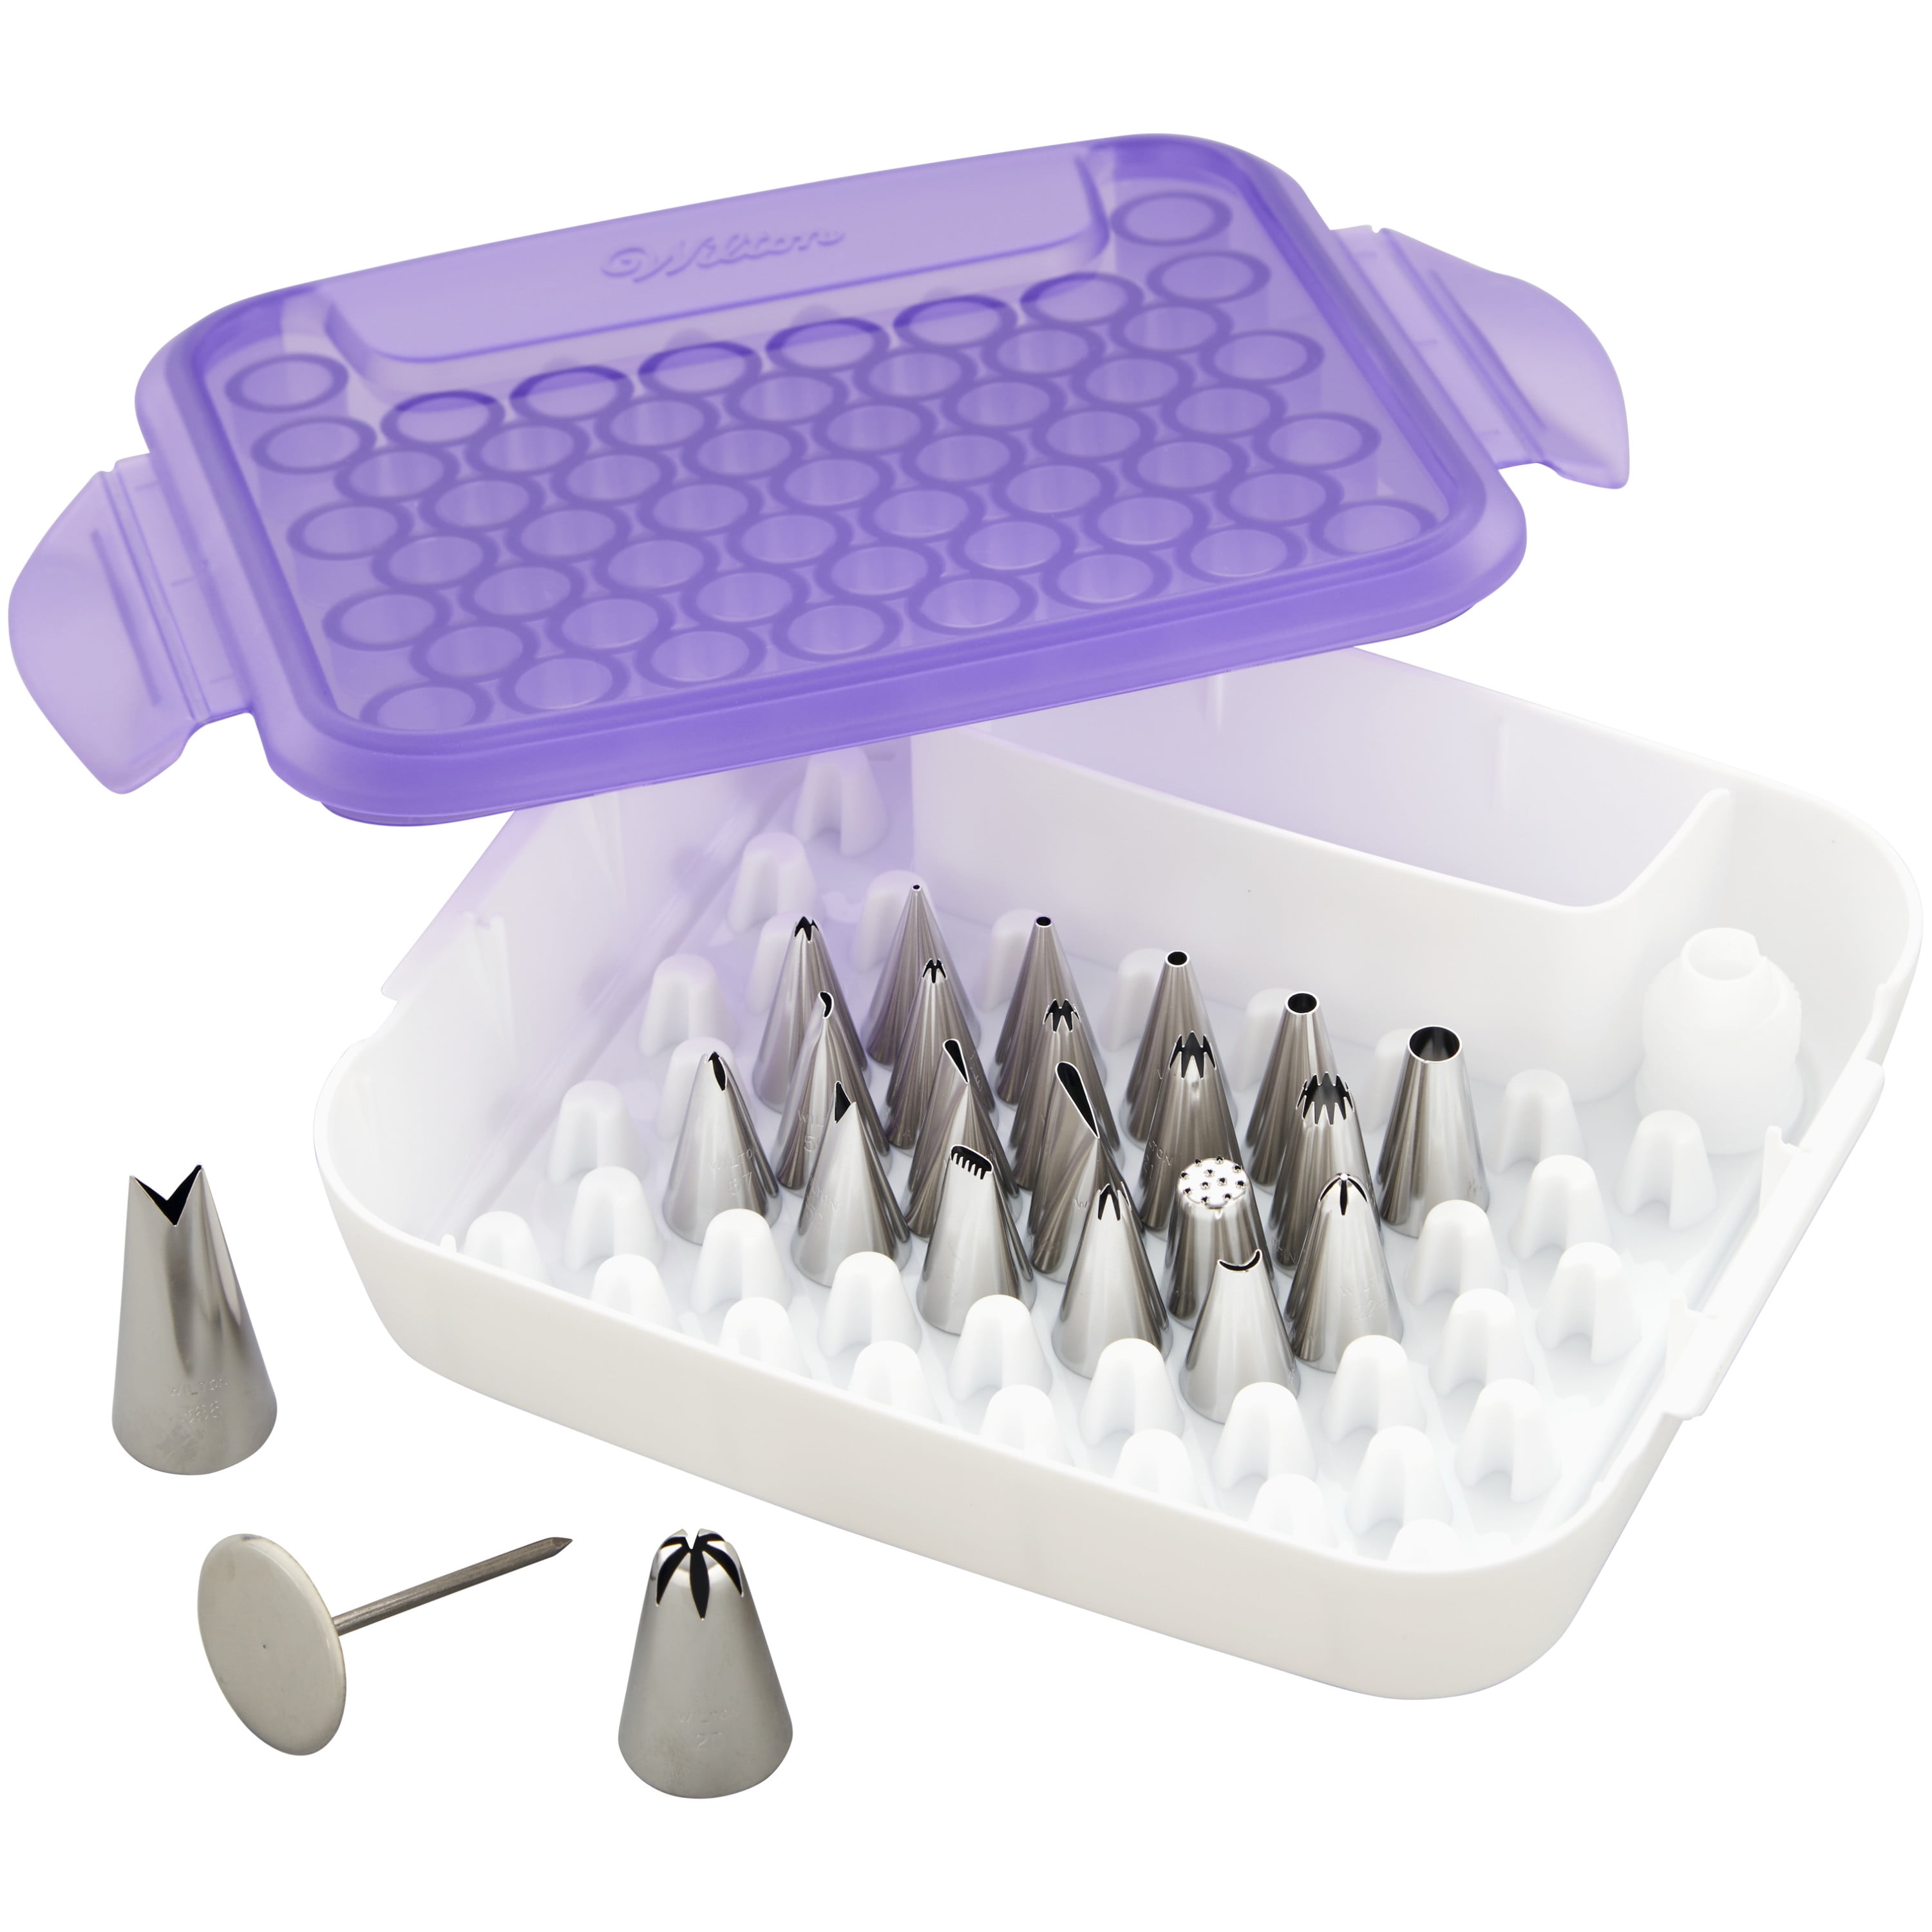 Wilton Decorating Tip Organizer Case - Holds 55 Standard-Sized Tips